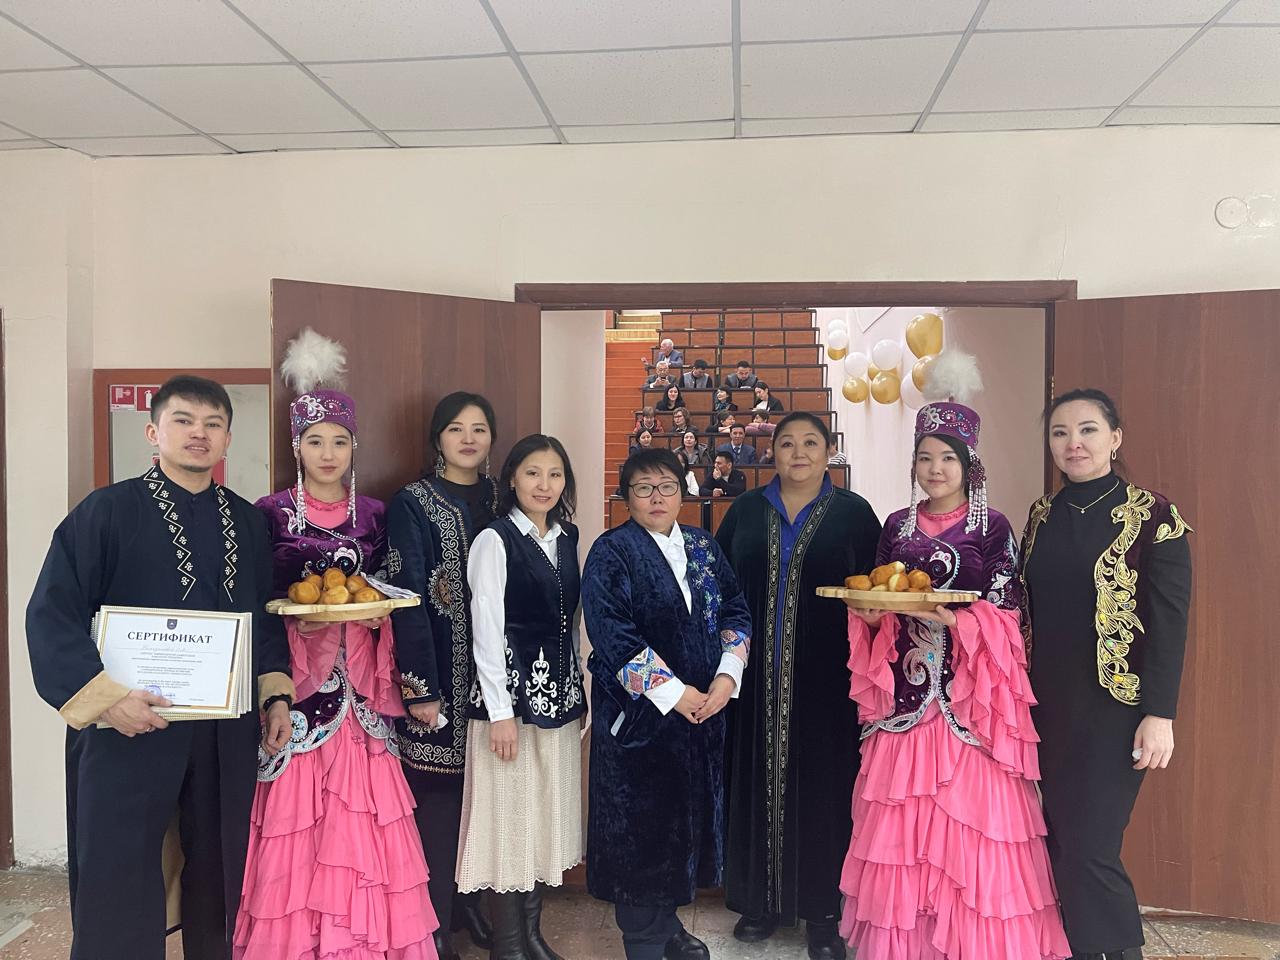 The Faculty of Geography and Environmental Sciences celebrated the 1st Nauryz "Thanksgiving" day